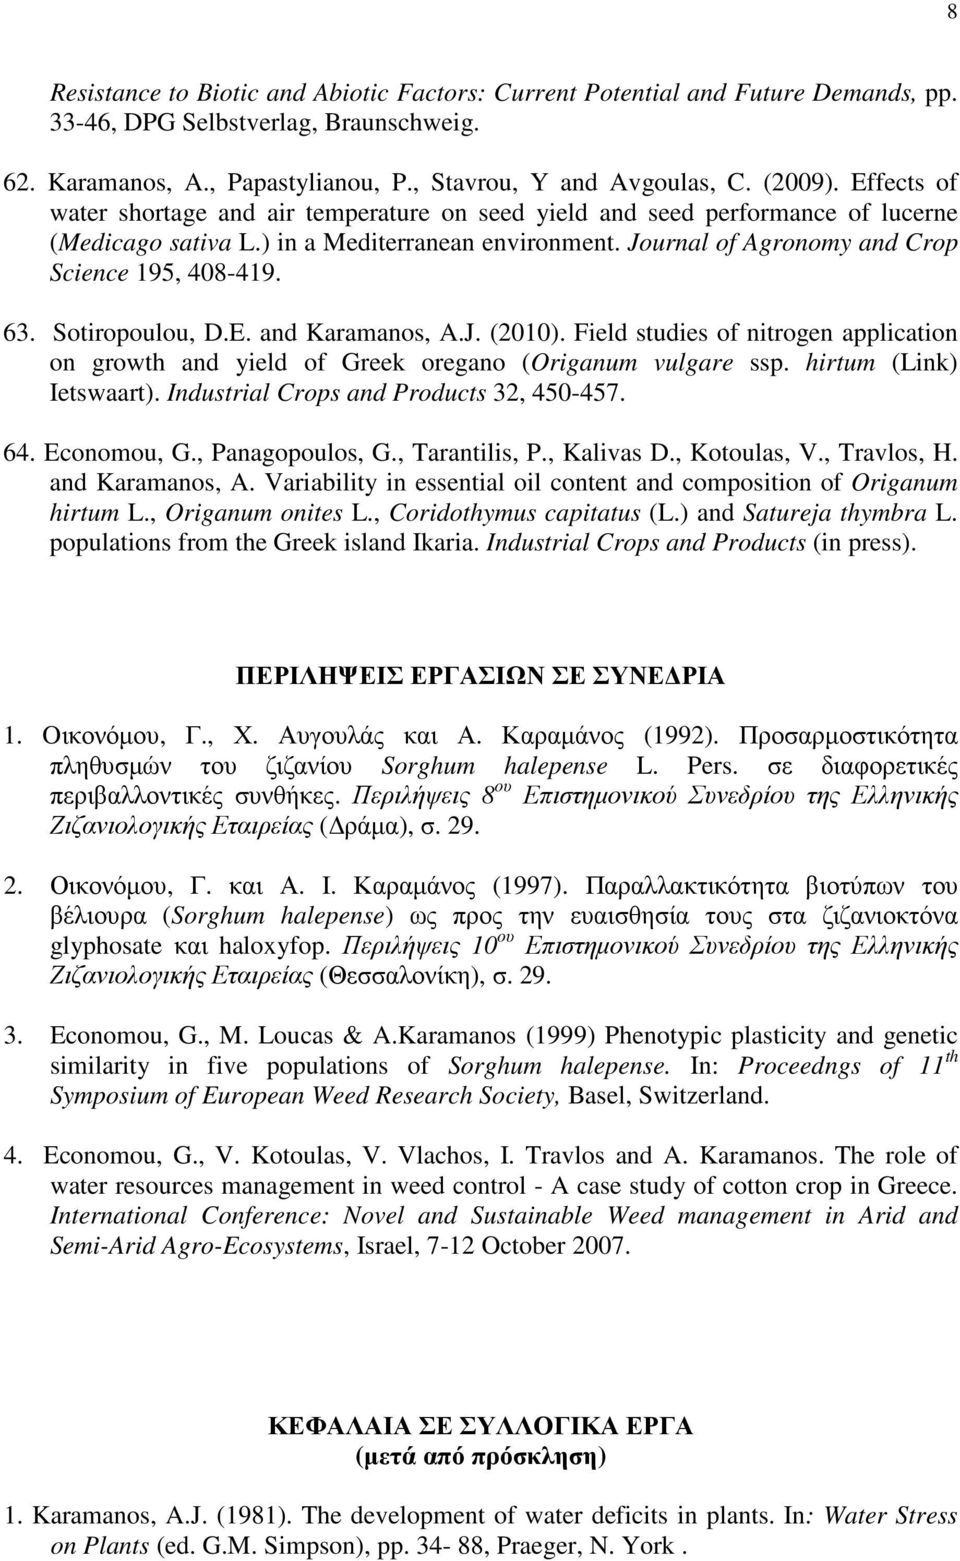 Sotiropoulou, D.E. and Karamanos, A.J. (2010). Field studies of nitrogen application on growth and yield of Greek oregano (Origanum vulgare ssp. hirtum (Link) Ietswaart).